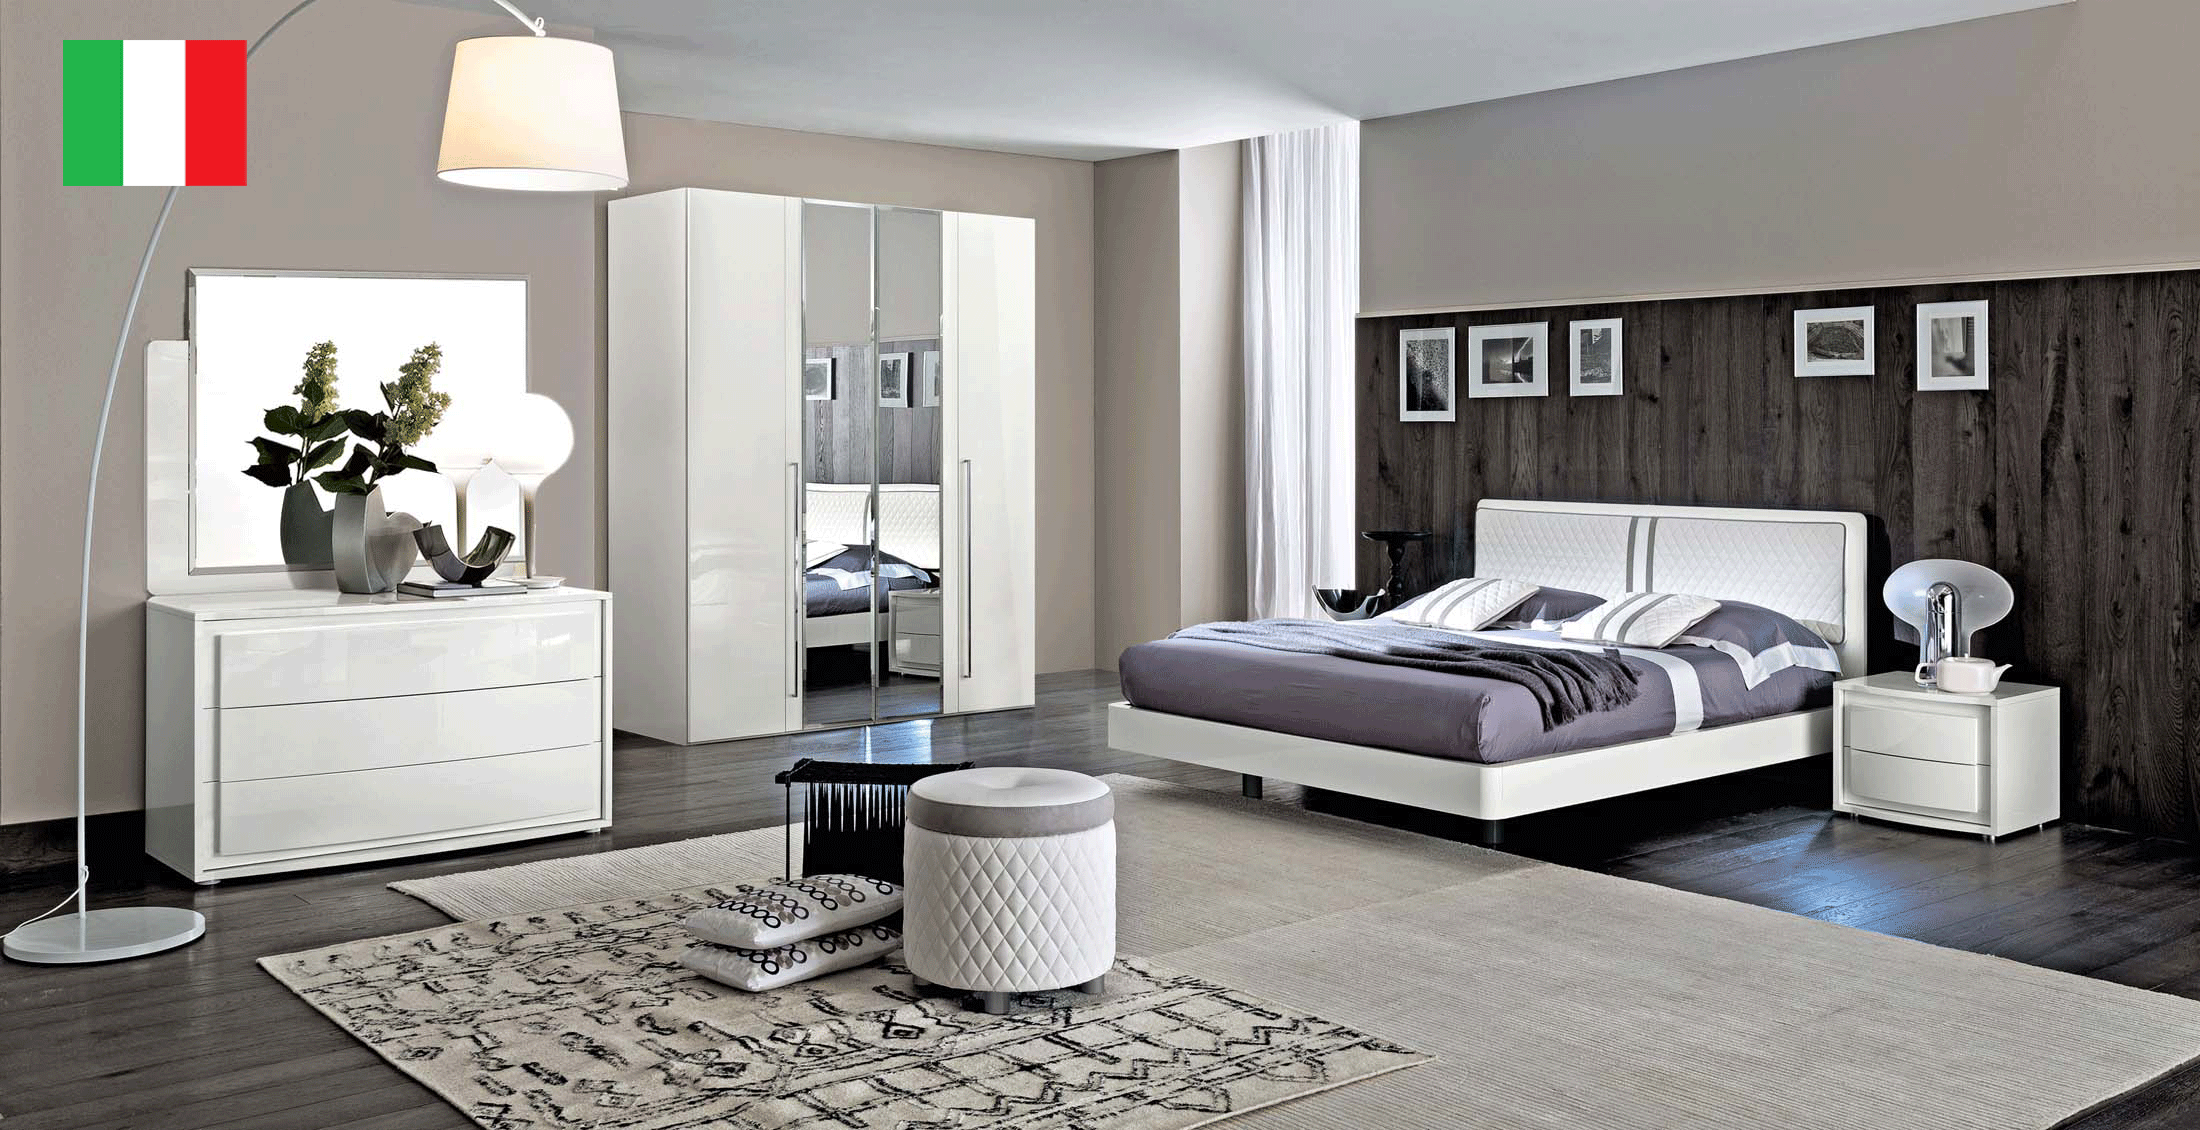 Bedroom Furniture Dressers and Chests Dama Bianca Bedroom by CamelGroup Italy